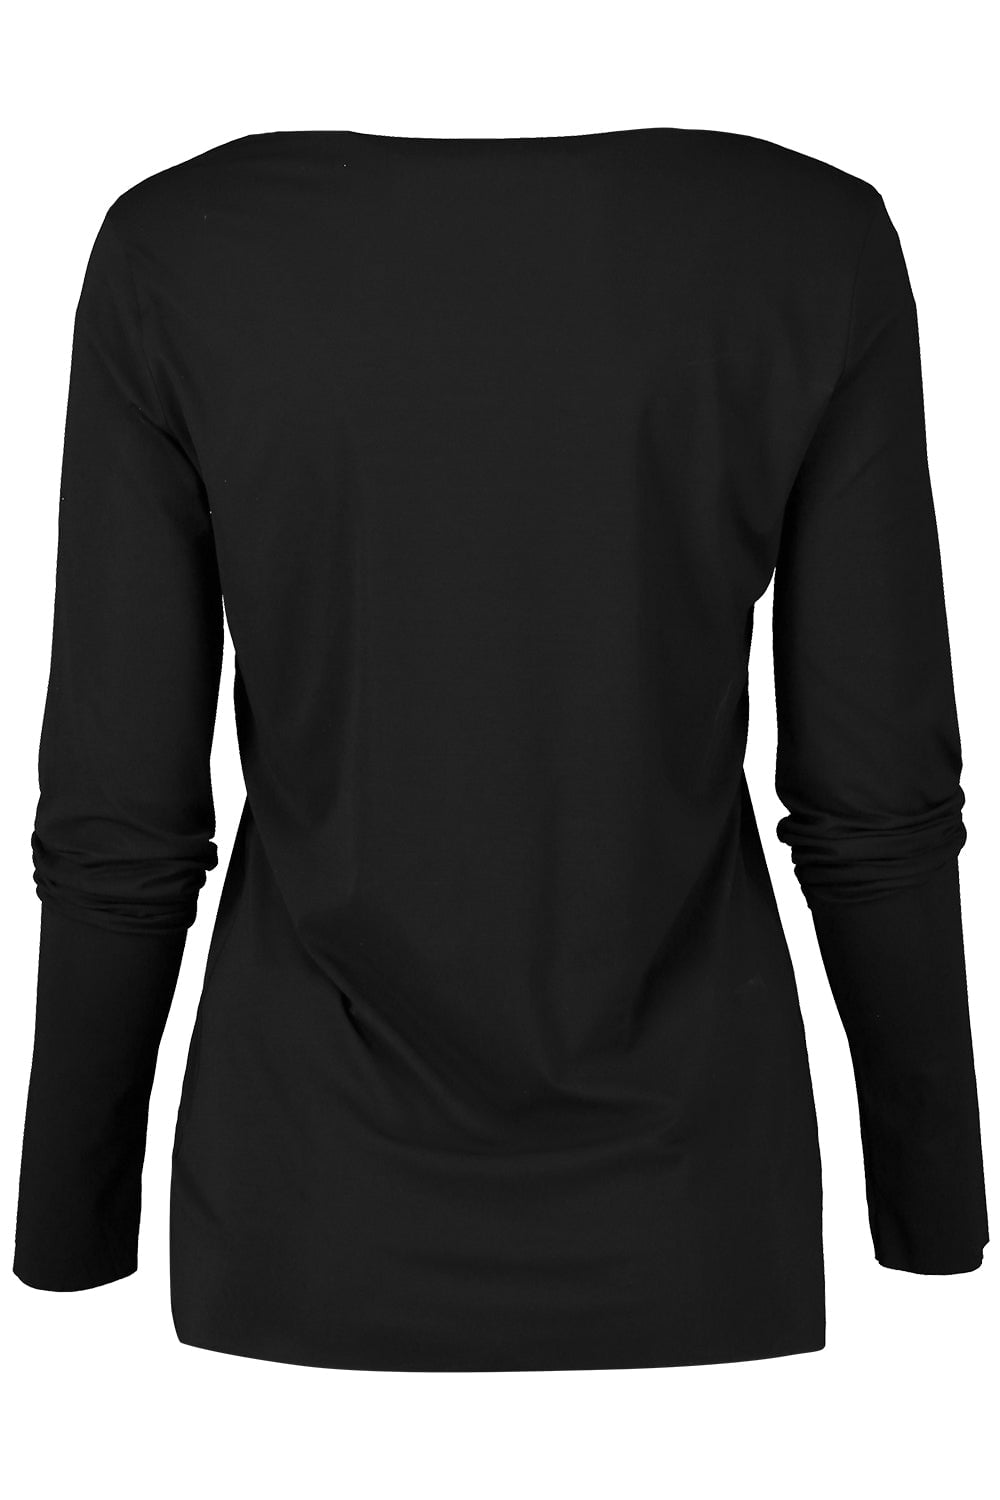 WOLFORD AURORA PURE TOP LONG SLEEVES, Pink Women's T-shirt